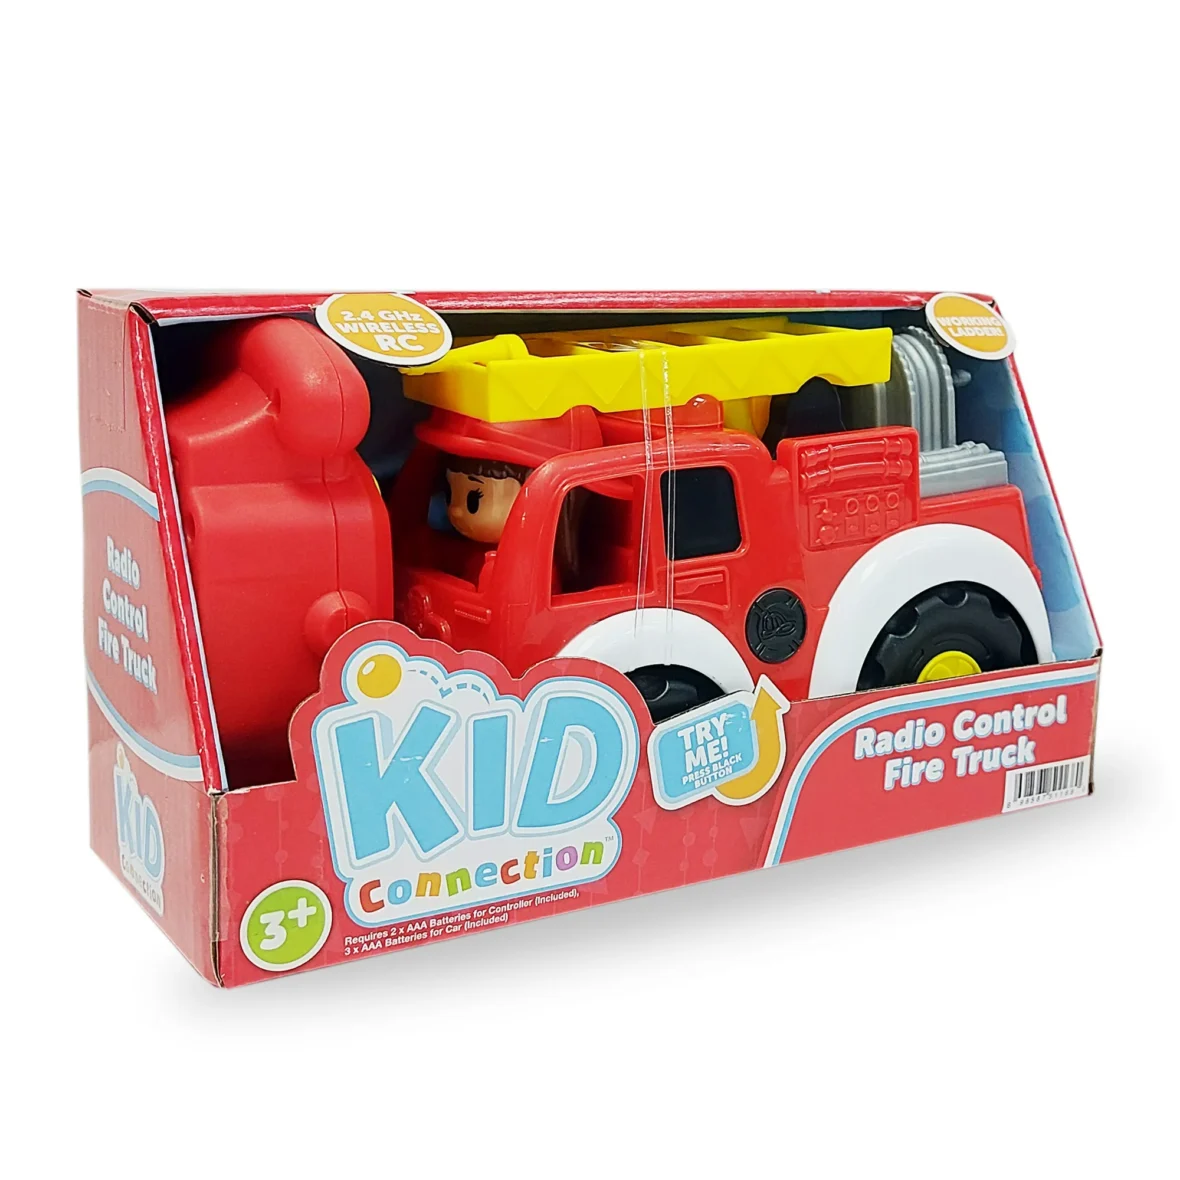 Kid Connection RC Fire Truck with Lights and Firefighter Figure, 2.4G